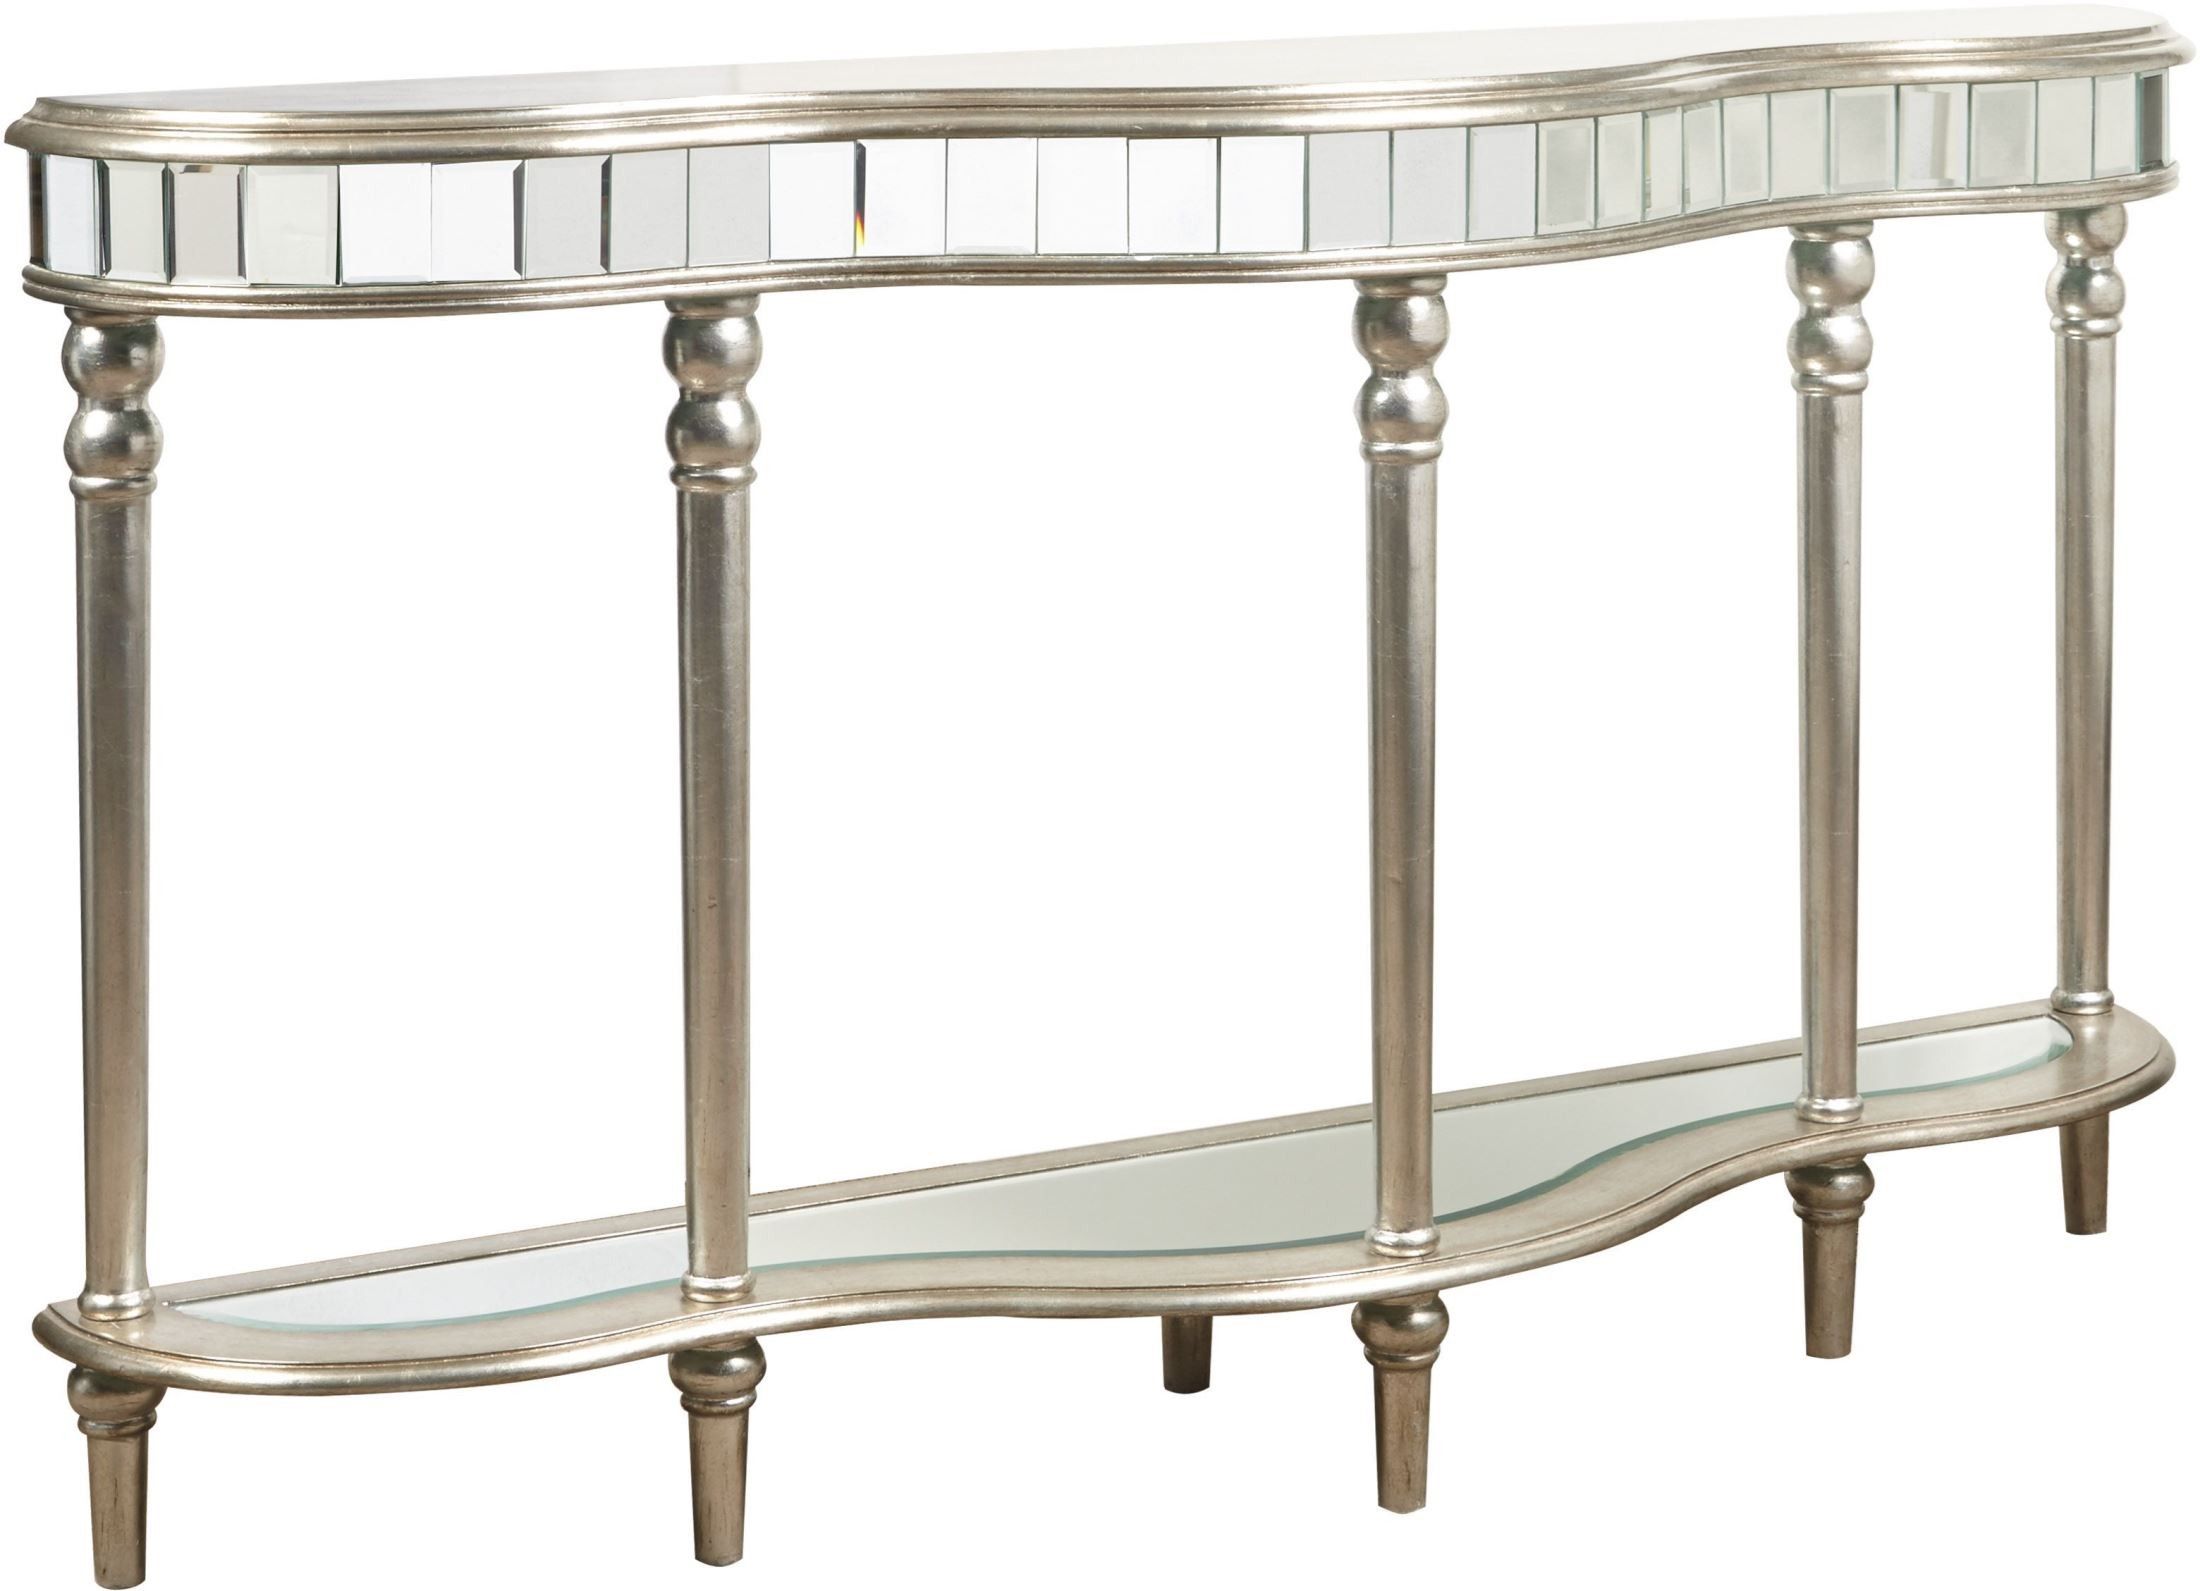 Silver Console Table From Pulaski | Coleman Furniture Inside Metallic Gold Console Tables (View 17 of 20)